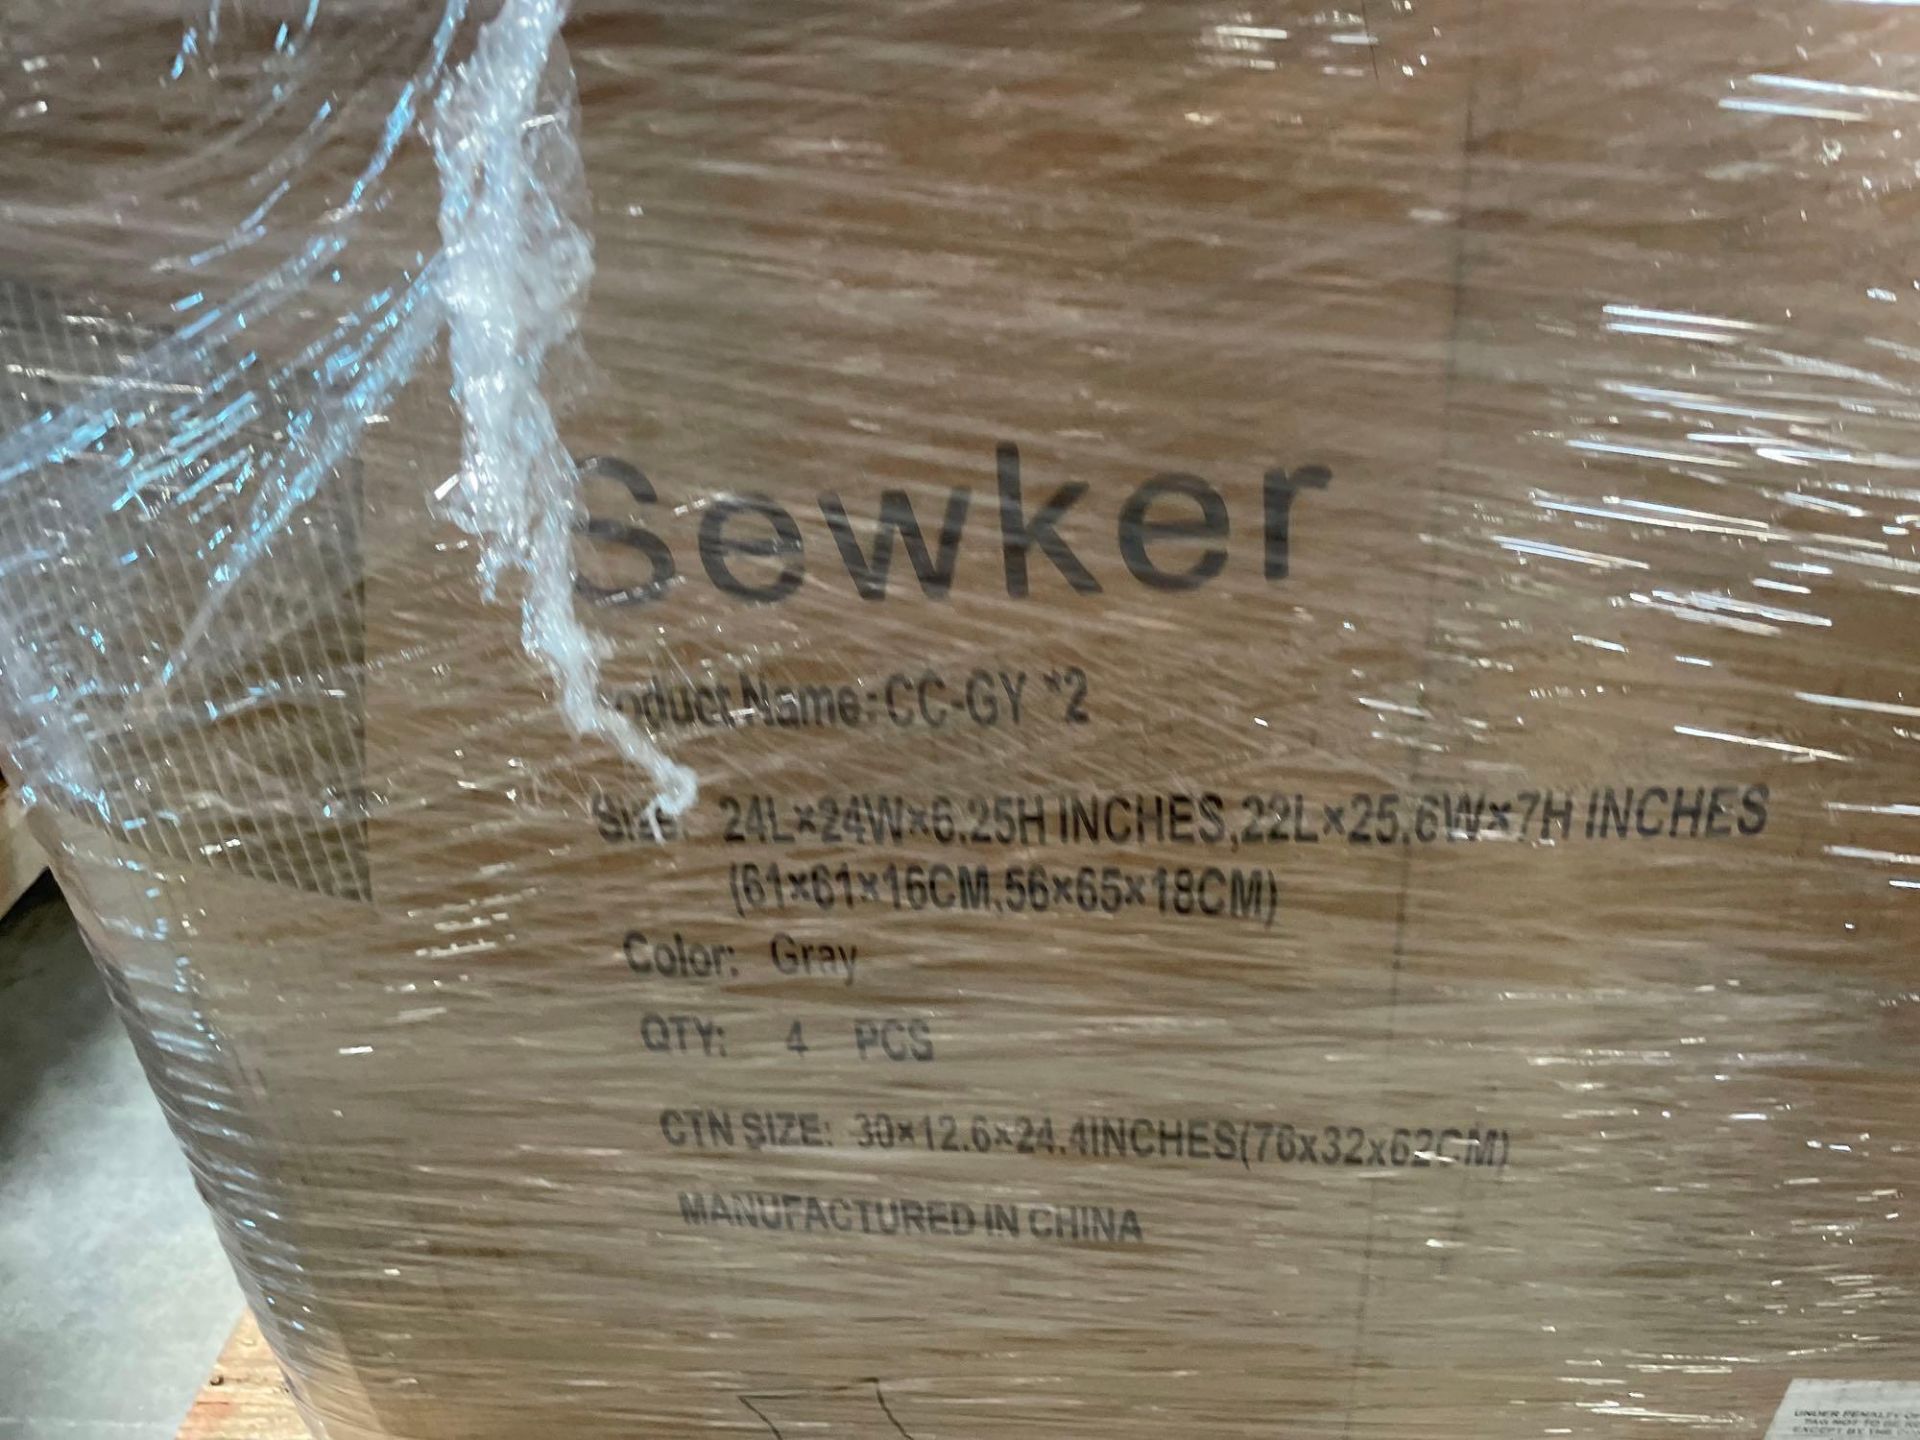 Sewker products - Image 5 of 5